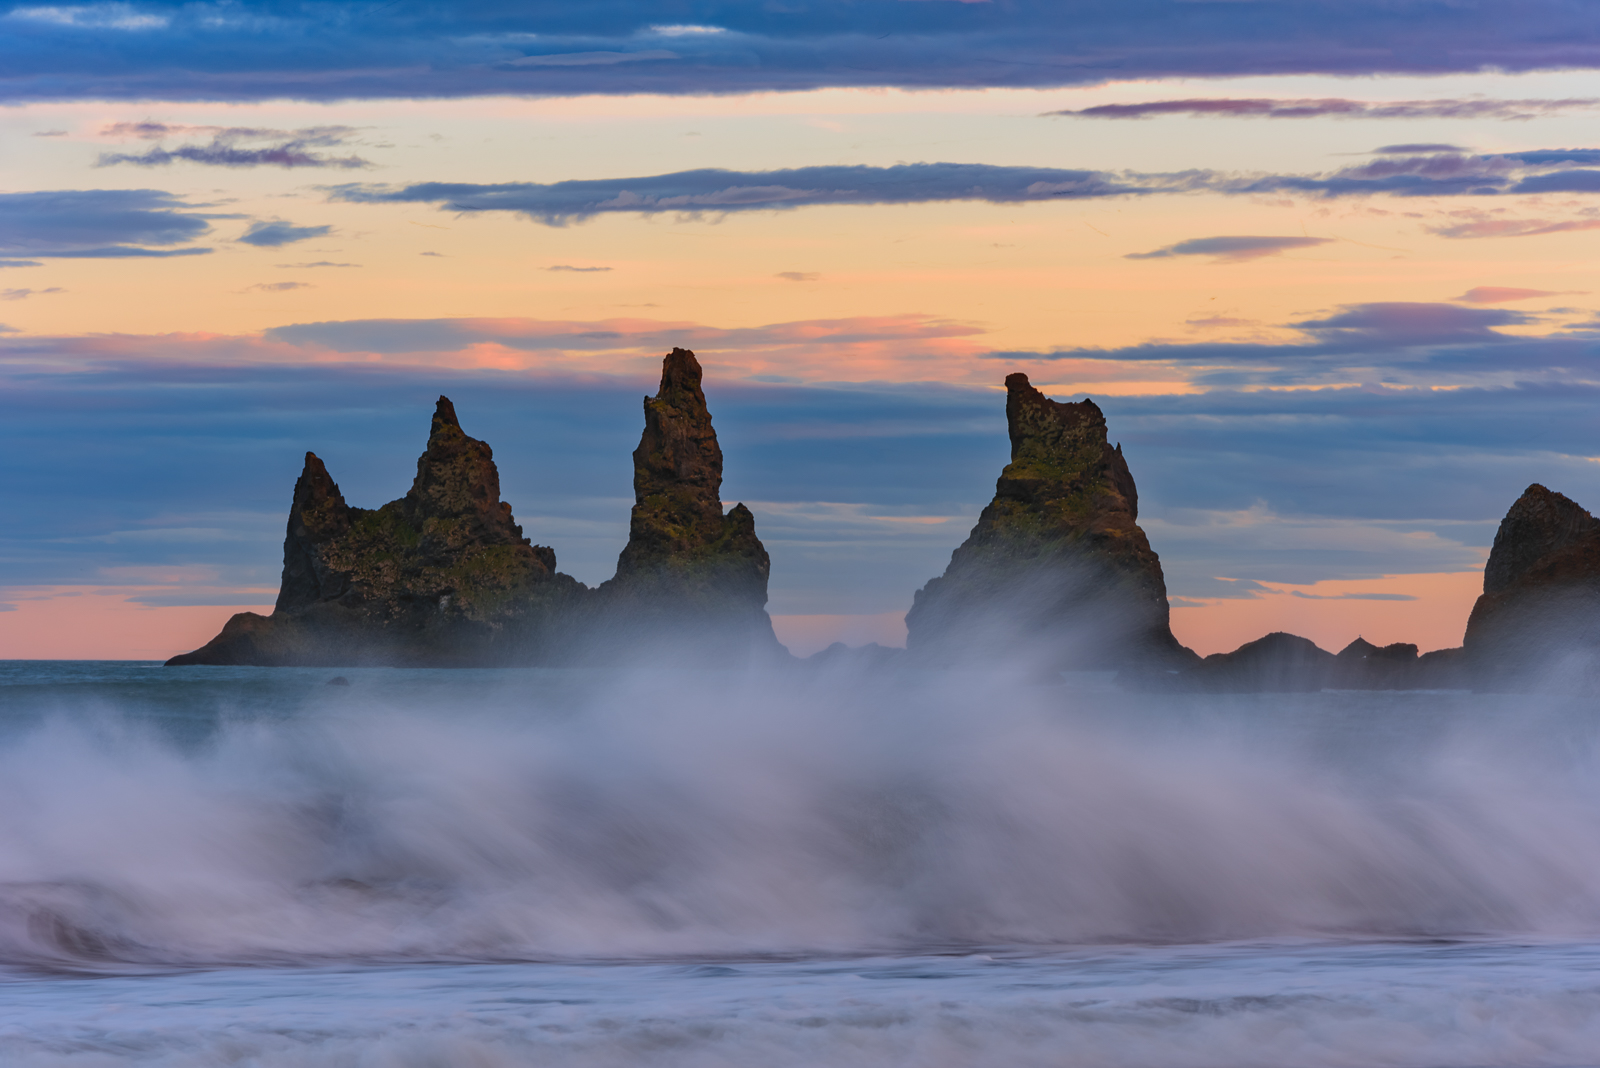 Basalt sea stacks situated under the mountain Reynisfjall near the village Vík, Mýrdal, southern Iceland